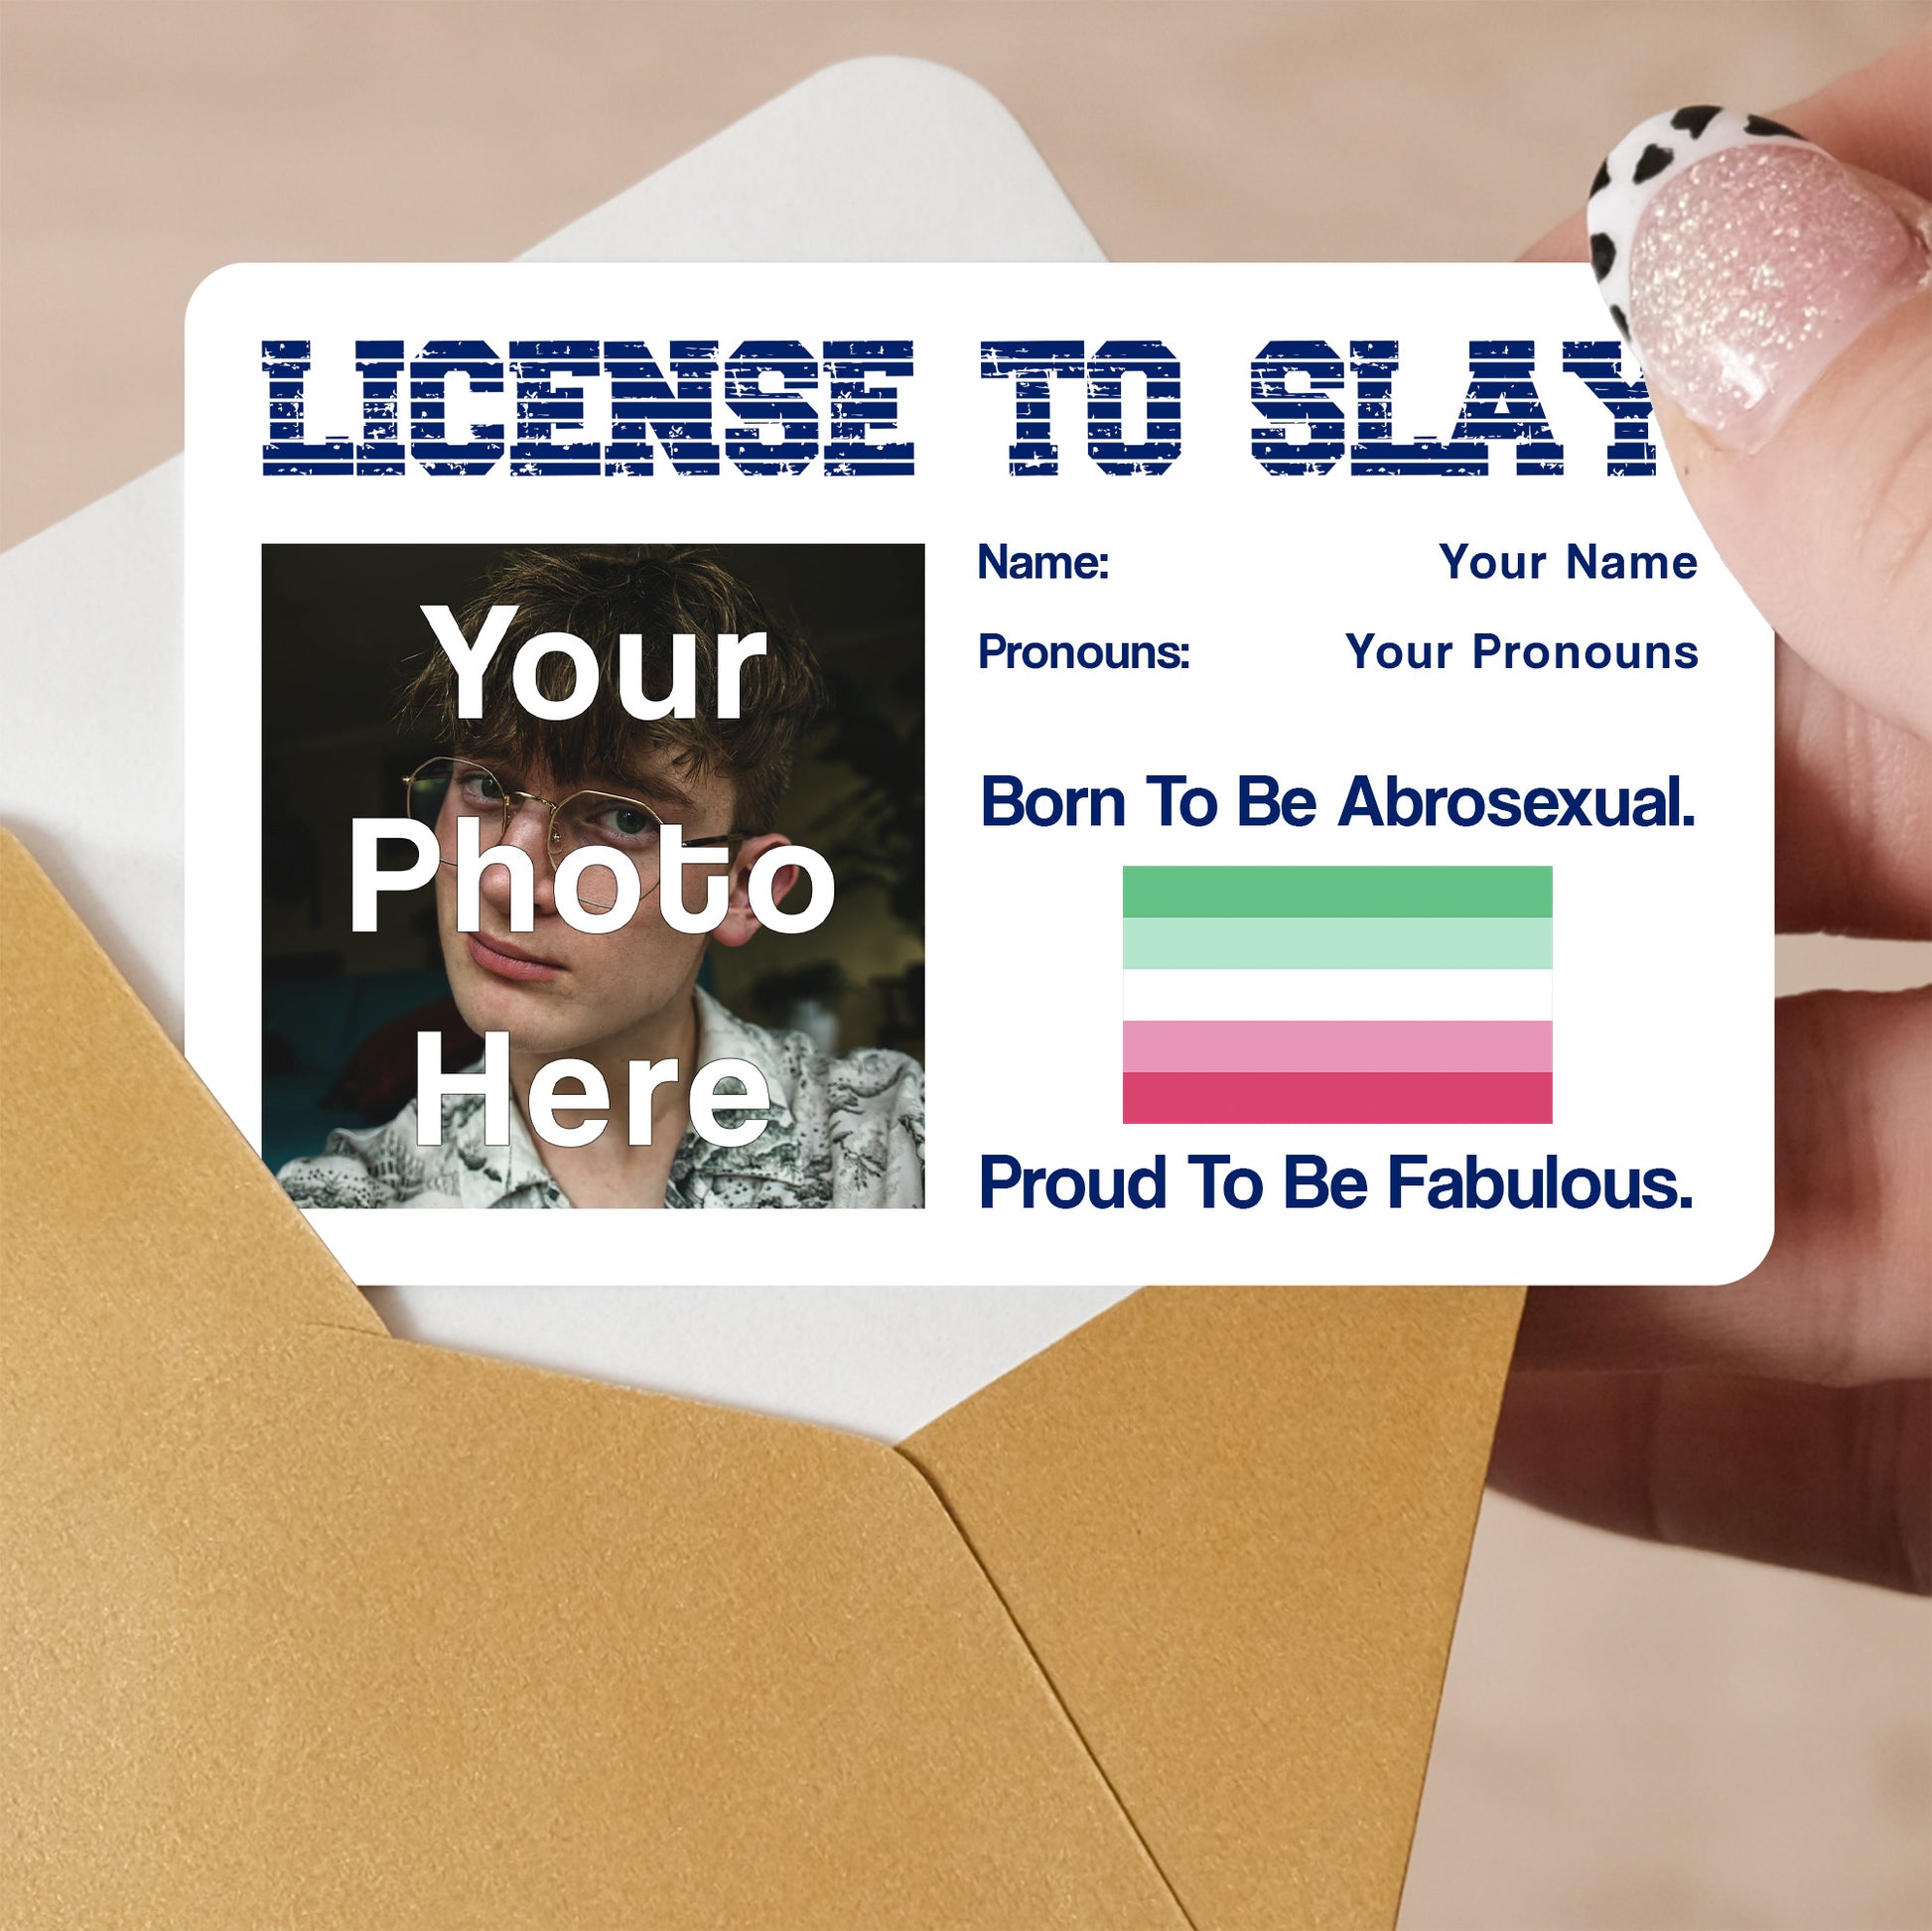 Abrosexual pride personalised license to slay card